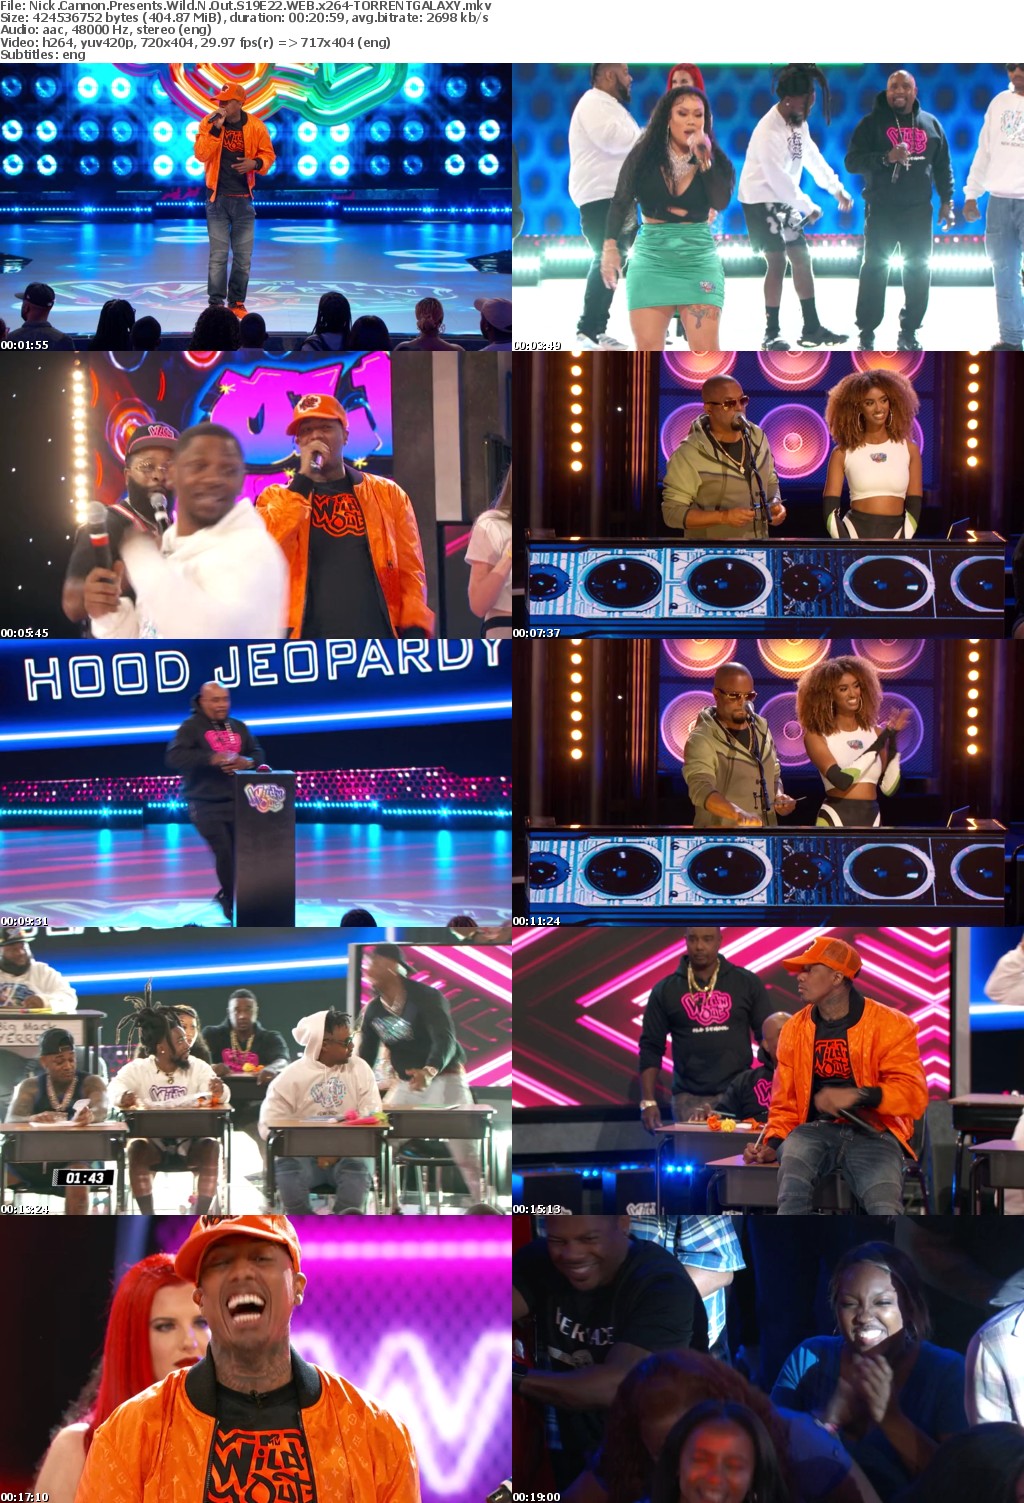 Nick Cannon Presents Wild N Out S19E22 WEB x264-GALAXY